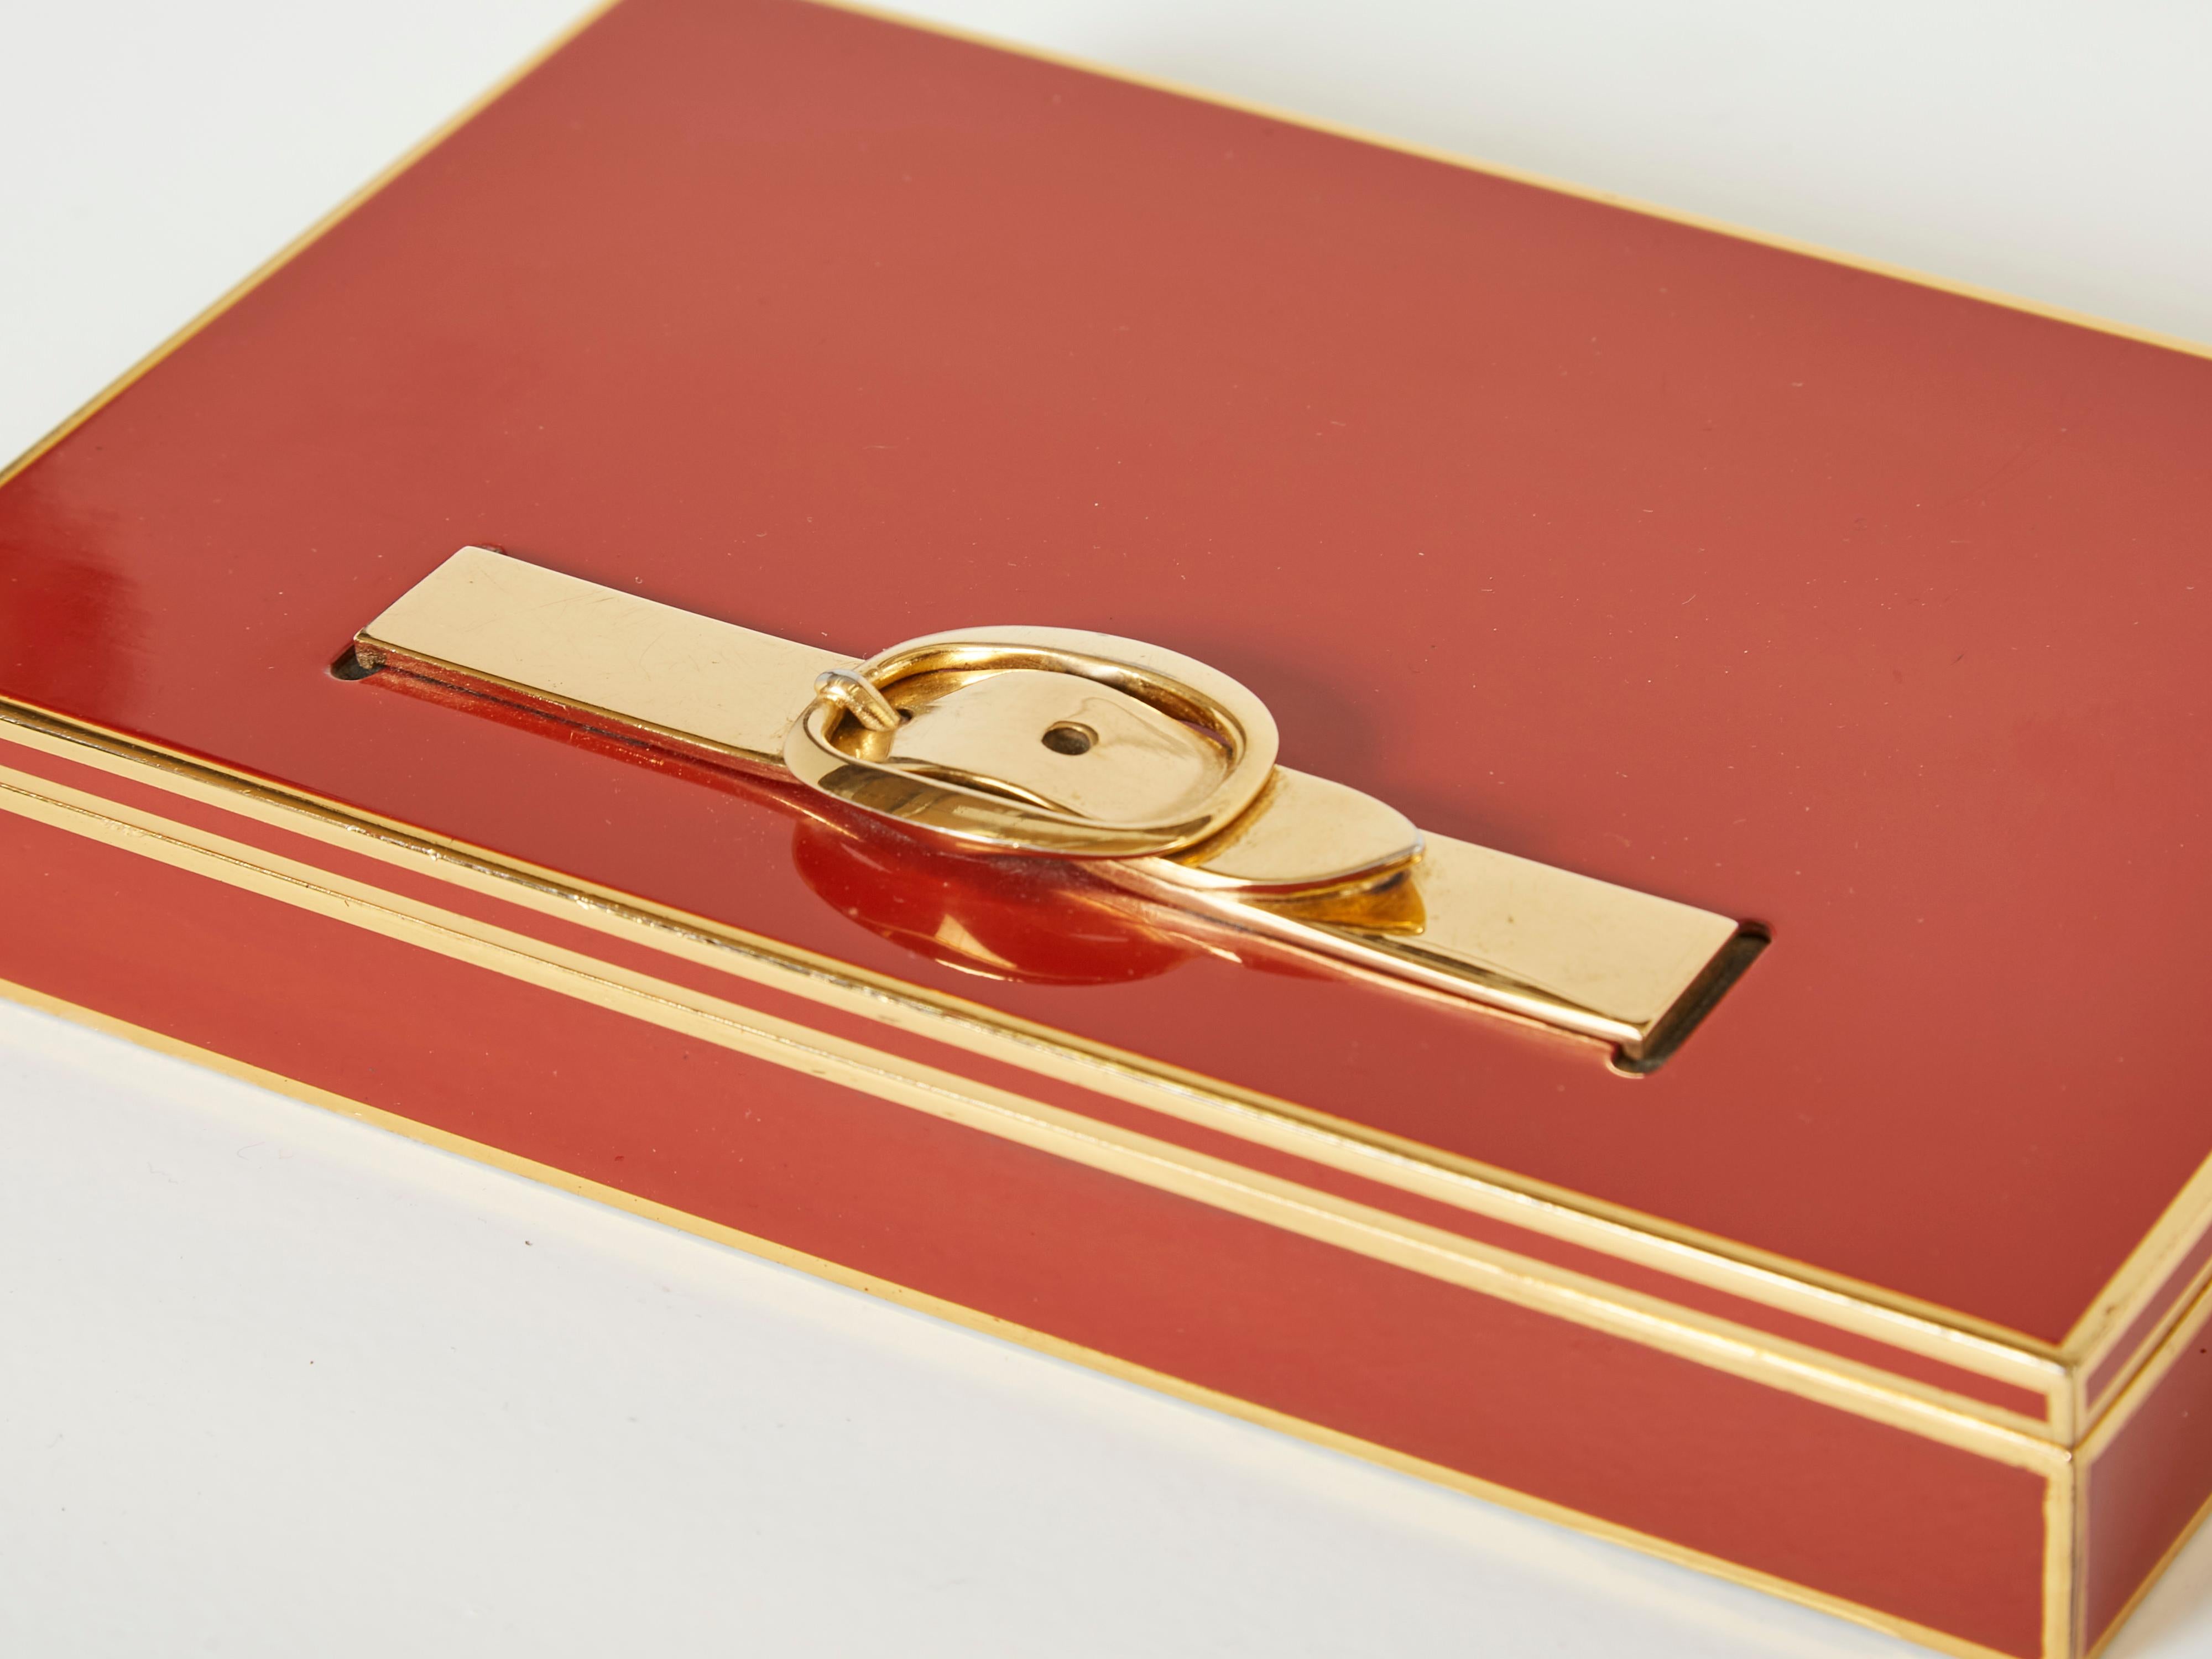 Beautiful French decorative box made by Hermès Paris in the 1970s. This red lacquered and brass jewellery box features a beautiful brass belt buckle on the top, with an interior covered with mahogany wood , with three compartments. The mix of red